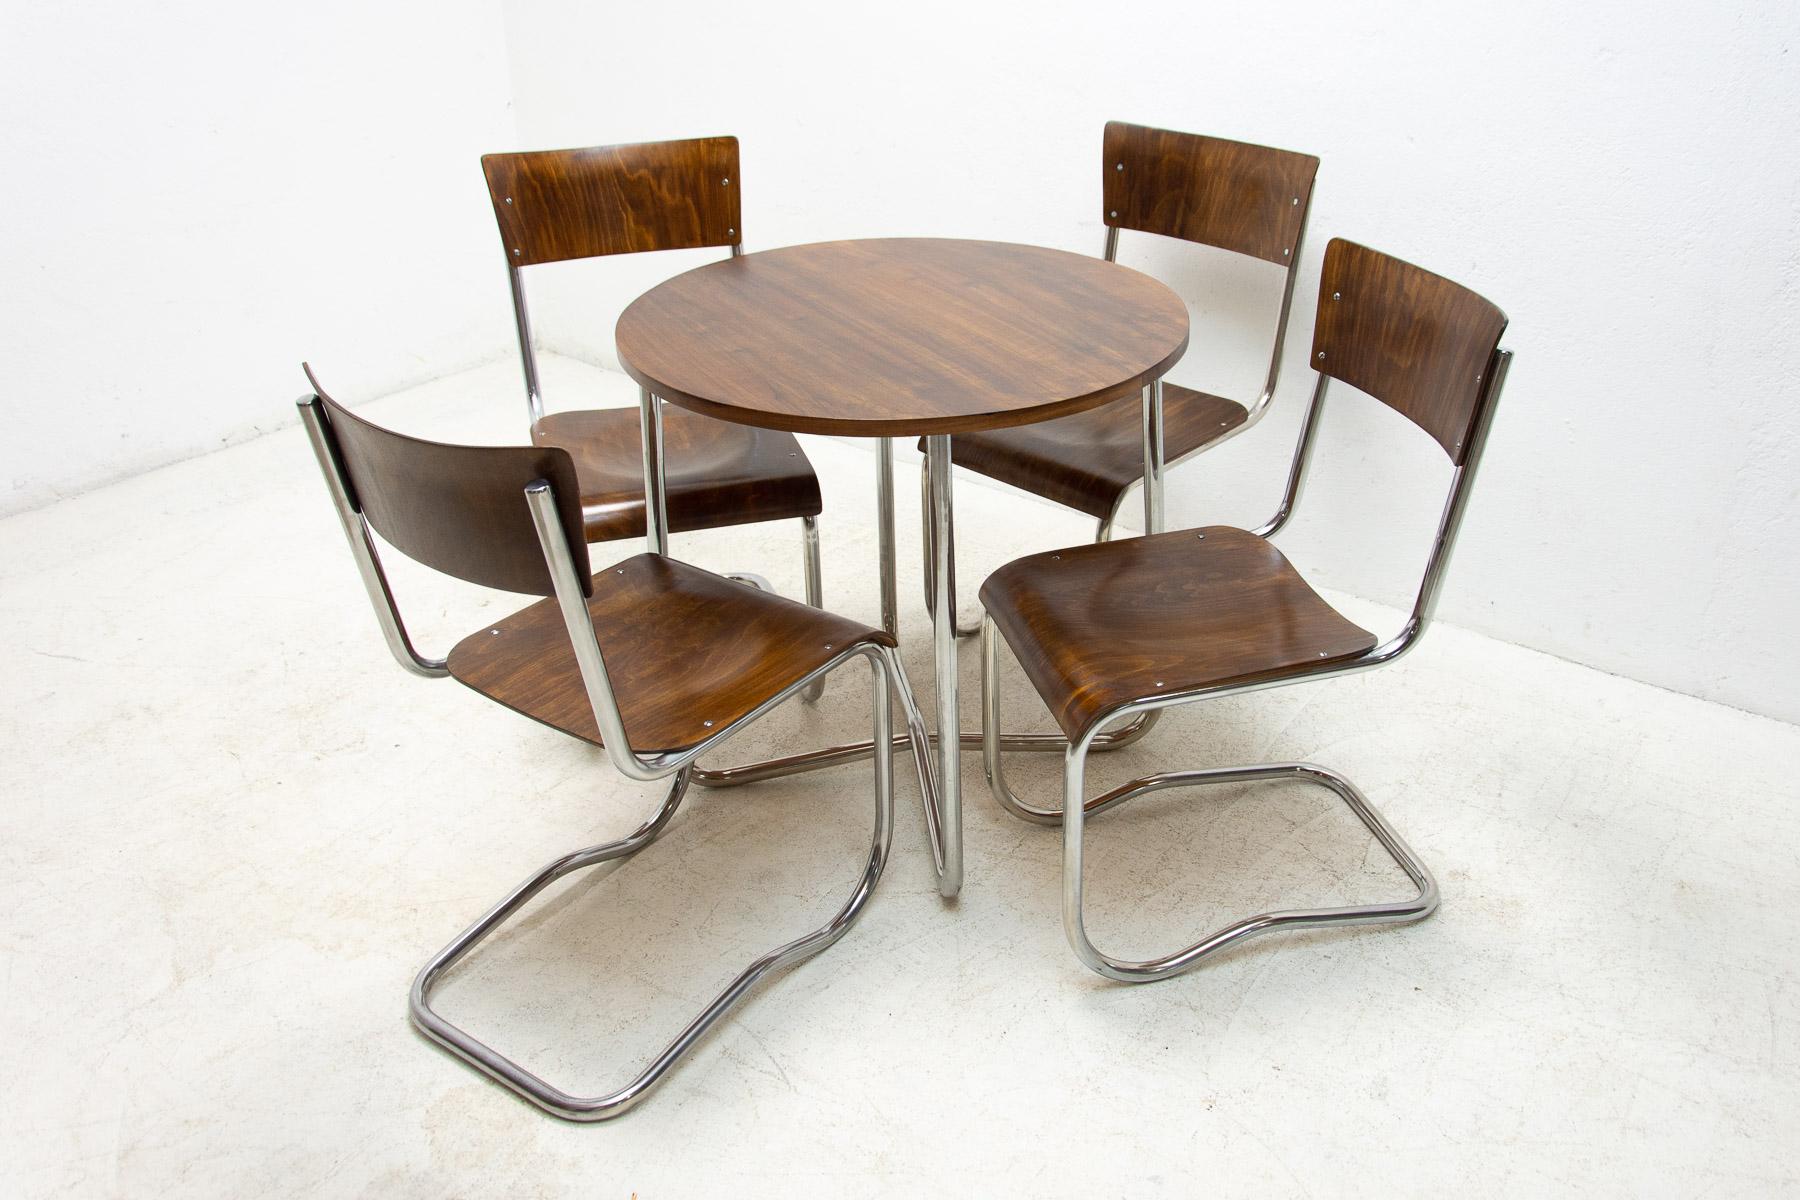 A cantilever lounge furniture set made in the 1930s and consisting of one coffee table and four dining chairs by Hynek Gottwald. Fully expertly renovated, the original wooden parts was cleaned and rubbed, high gloss polyurethane lacquer in original